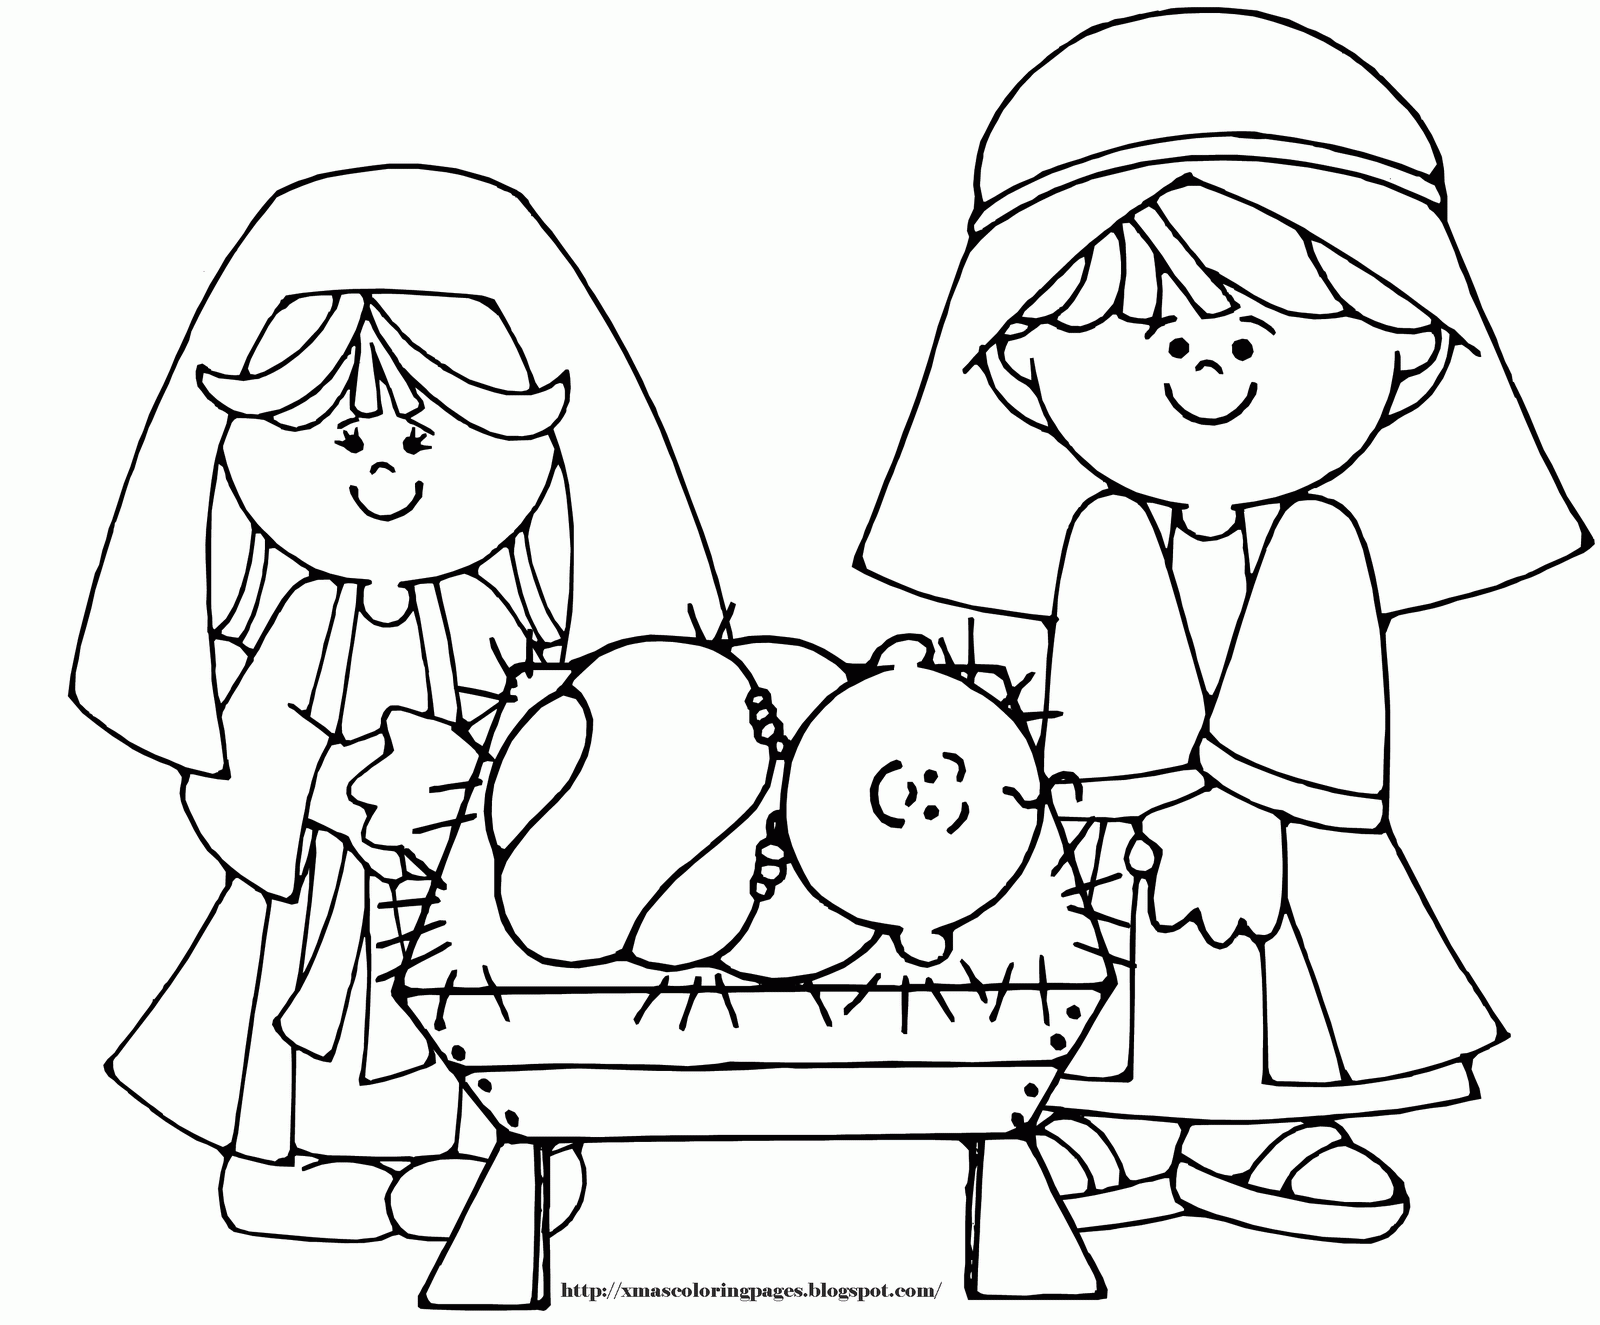 Jesus Coloring Pages For Adults 2 New Hd Template Images Coloring ...